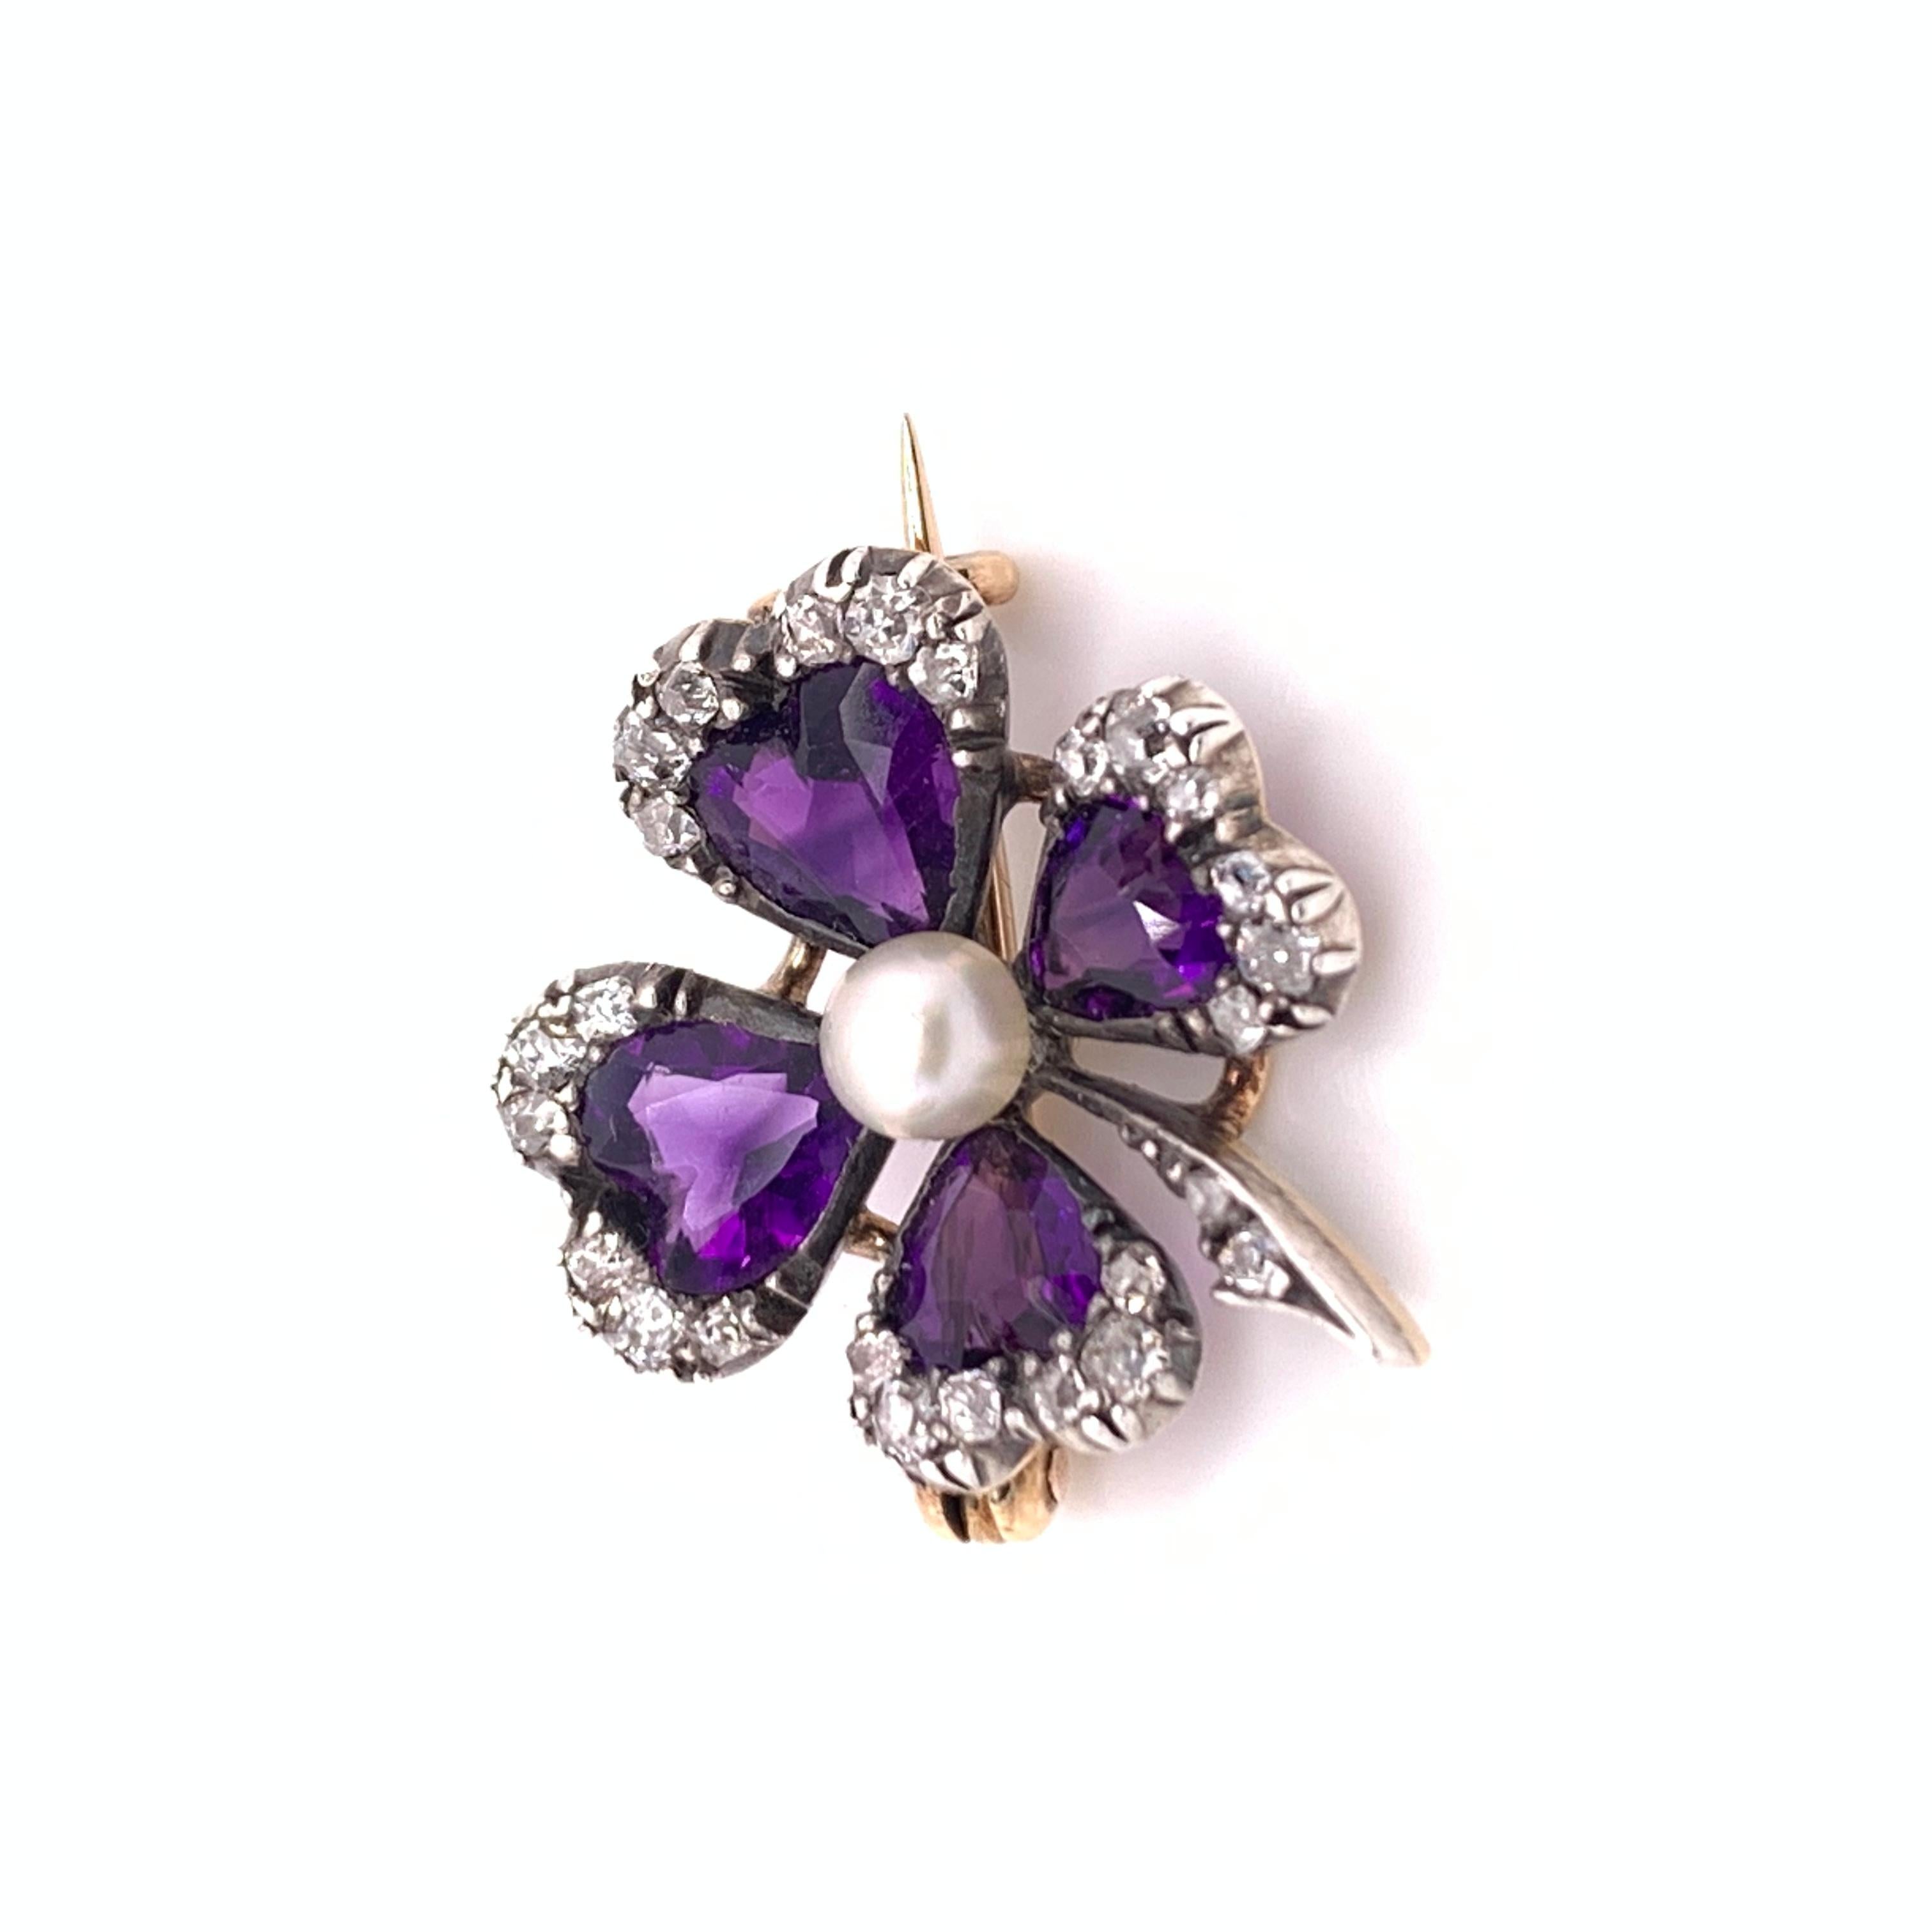 Victorian Antique Amethyst and Diamond Four-Leaf Clover Brooch